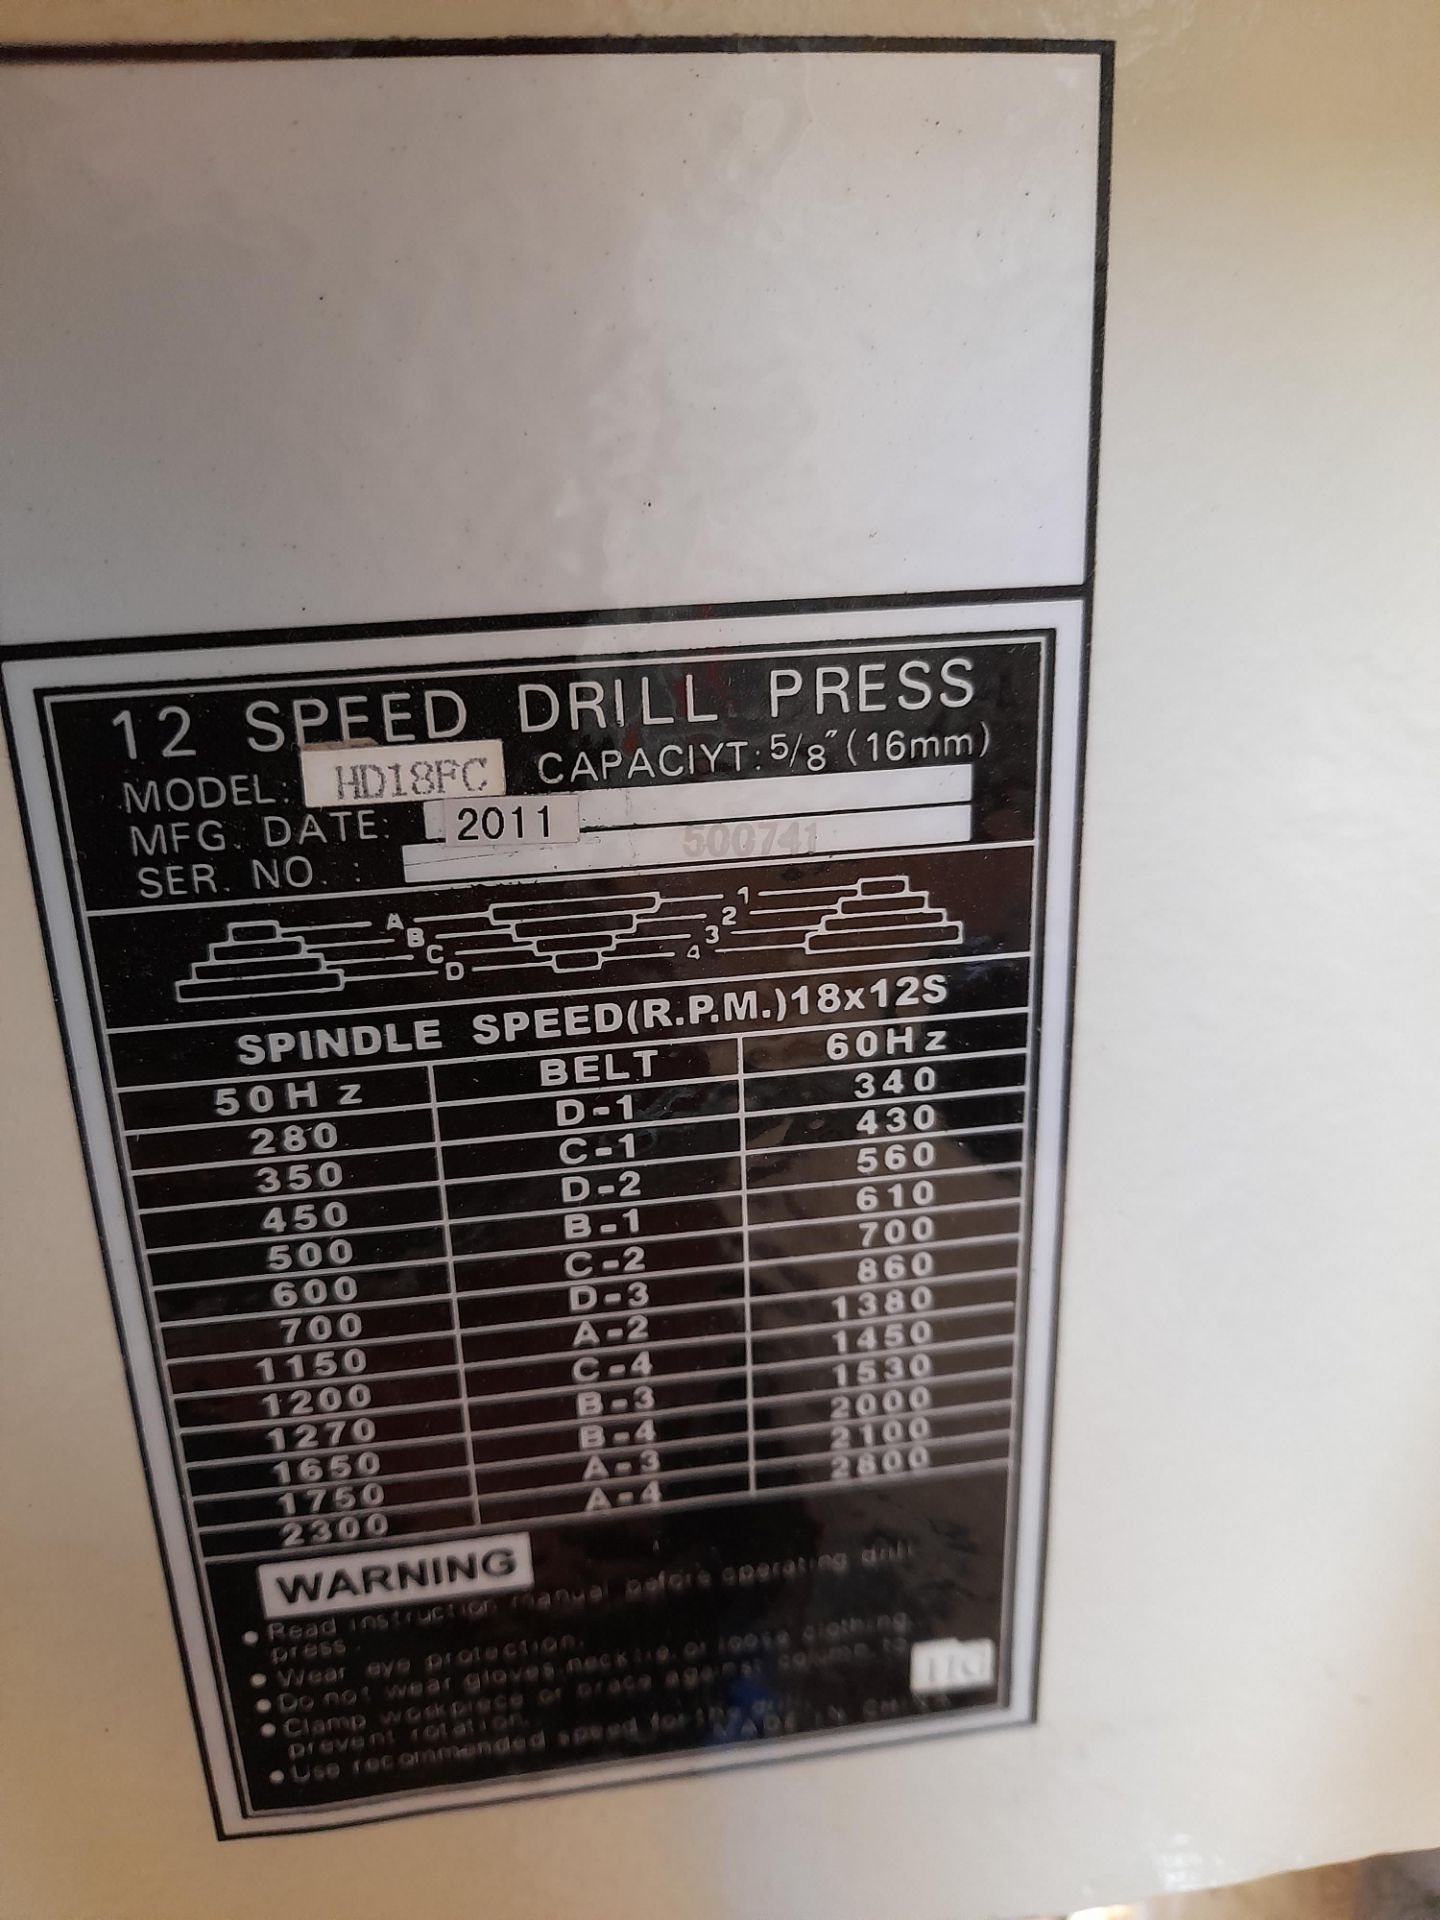 Axminster HD18FC 12 Speed Drill Press (Serial Number 500741, 2011) - Image 5 of 5